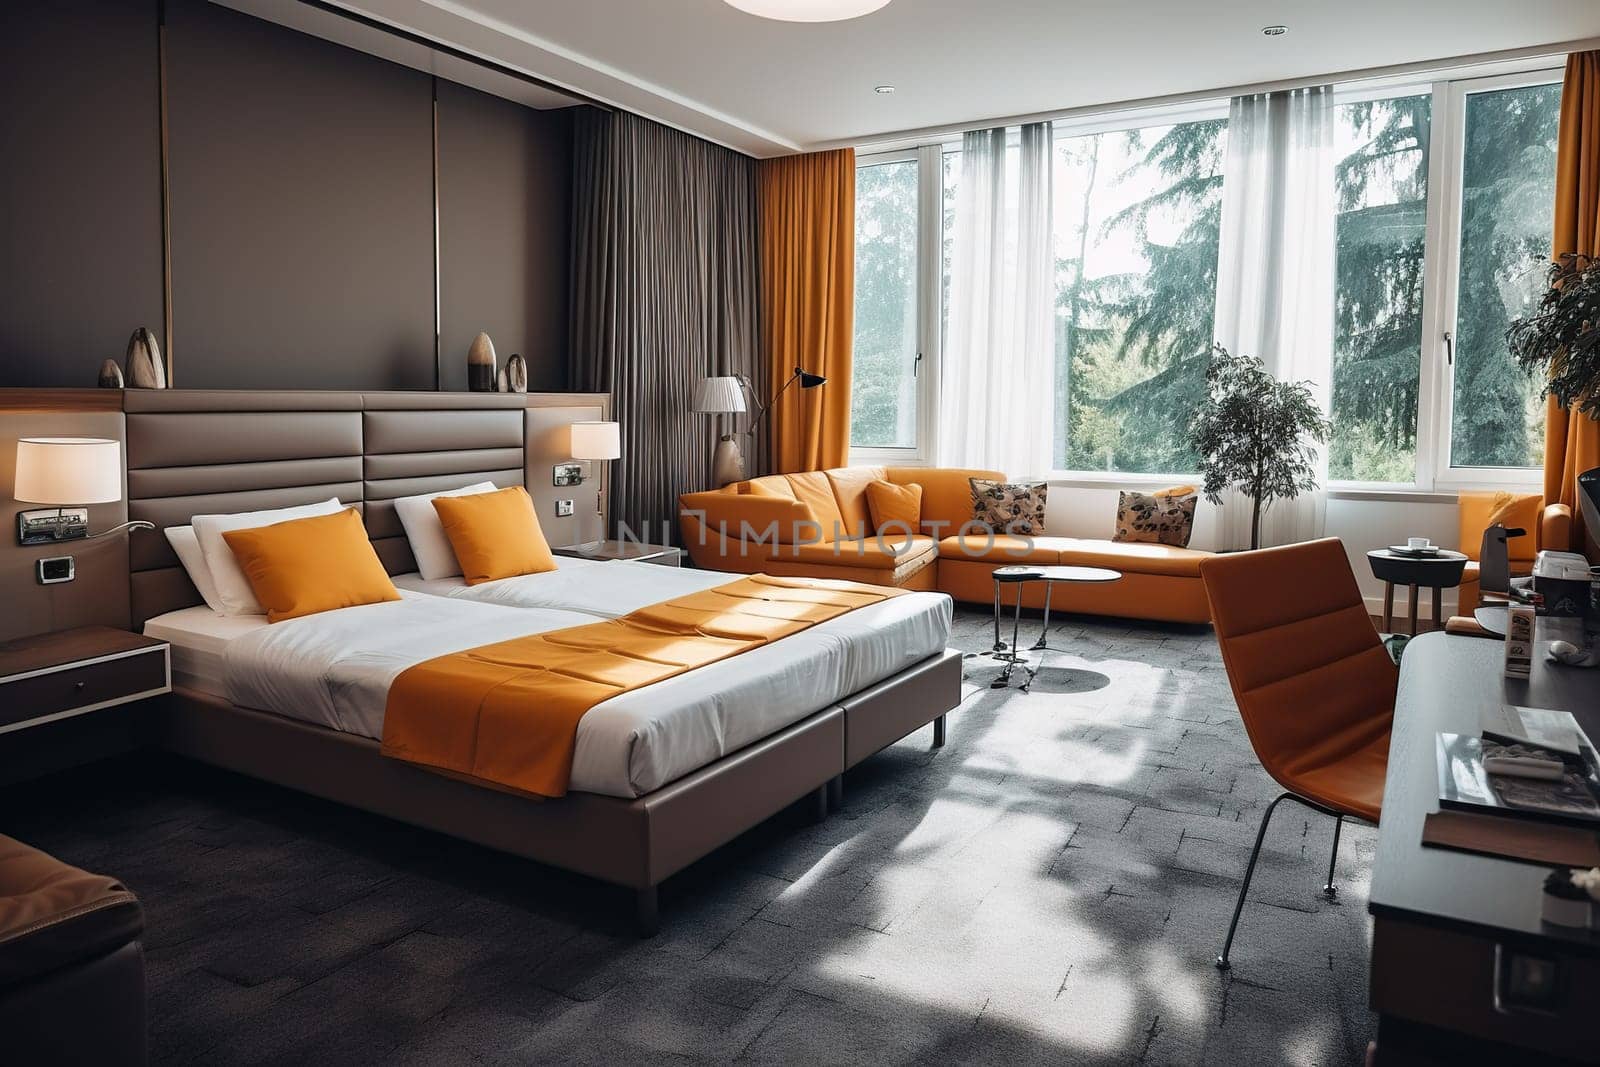 Luxurious, bright bedroom with a comfortable double bed, modern furniture and a beautiful view from the window. Concept of interior, architecture, travel. by Vovmar